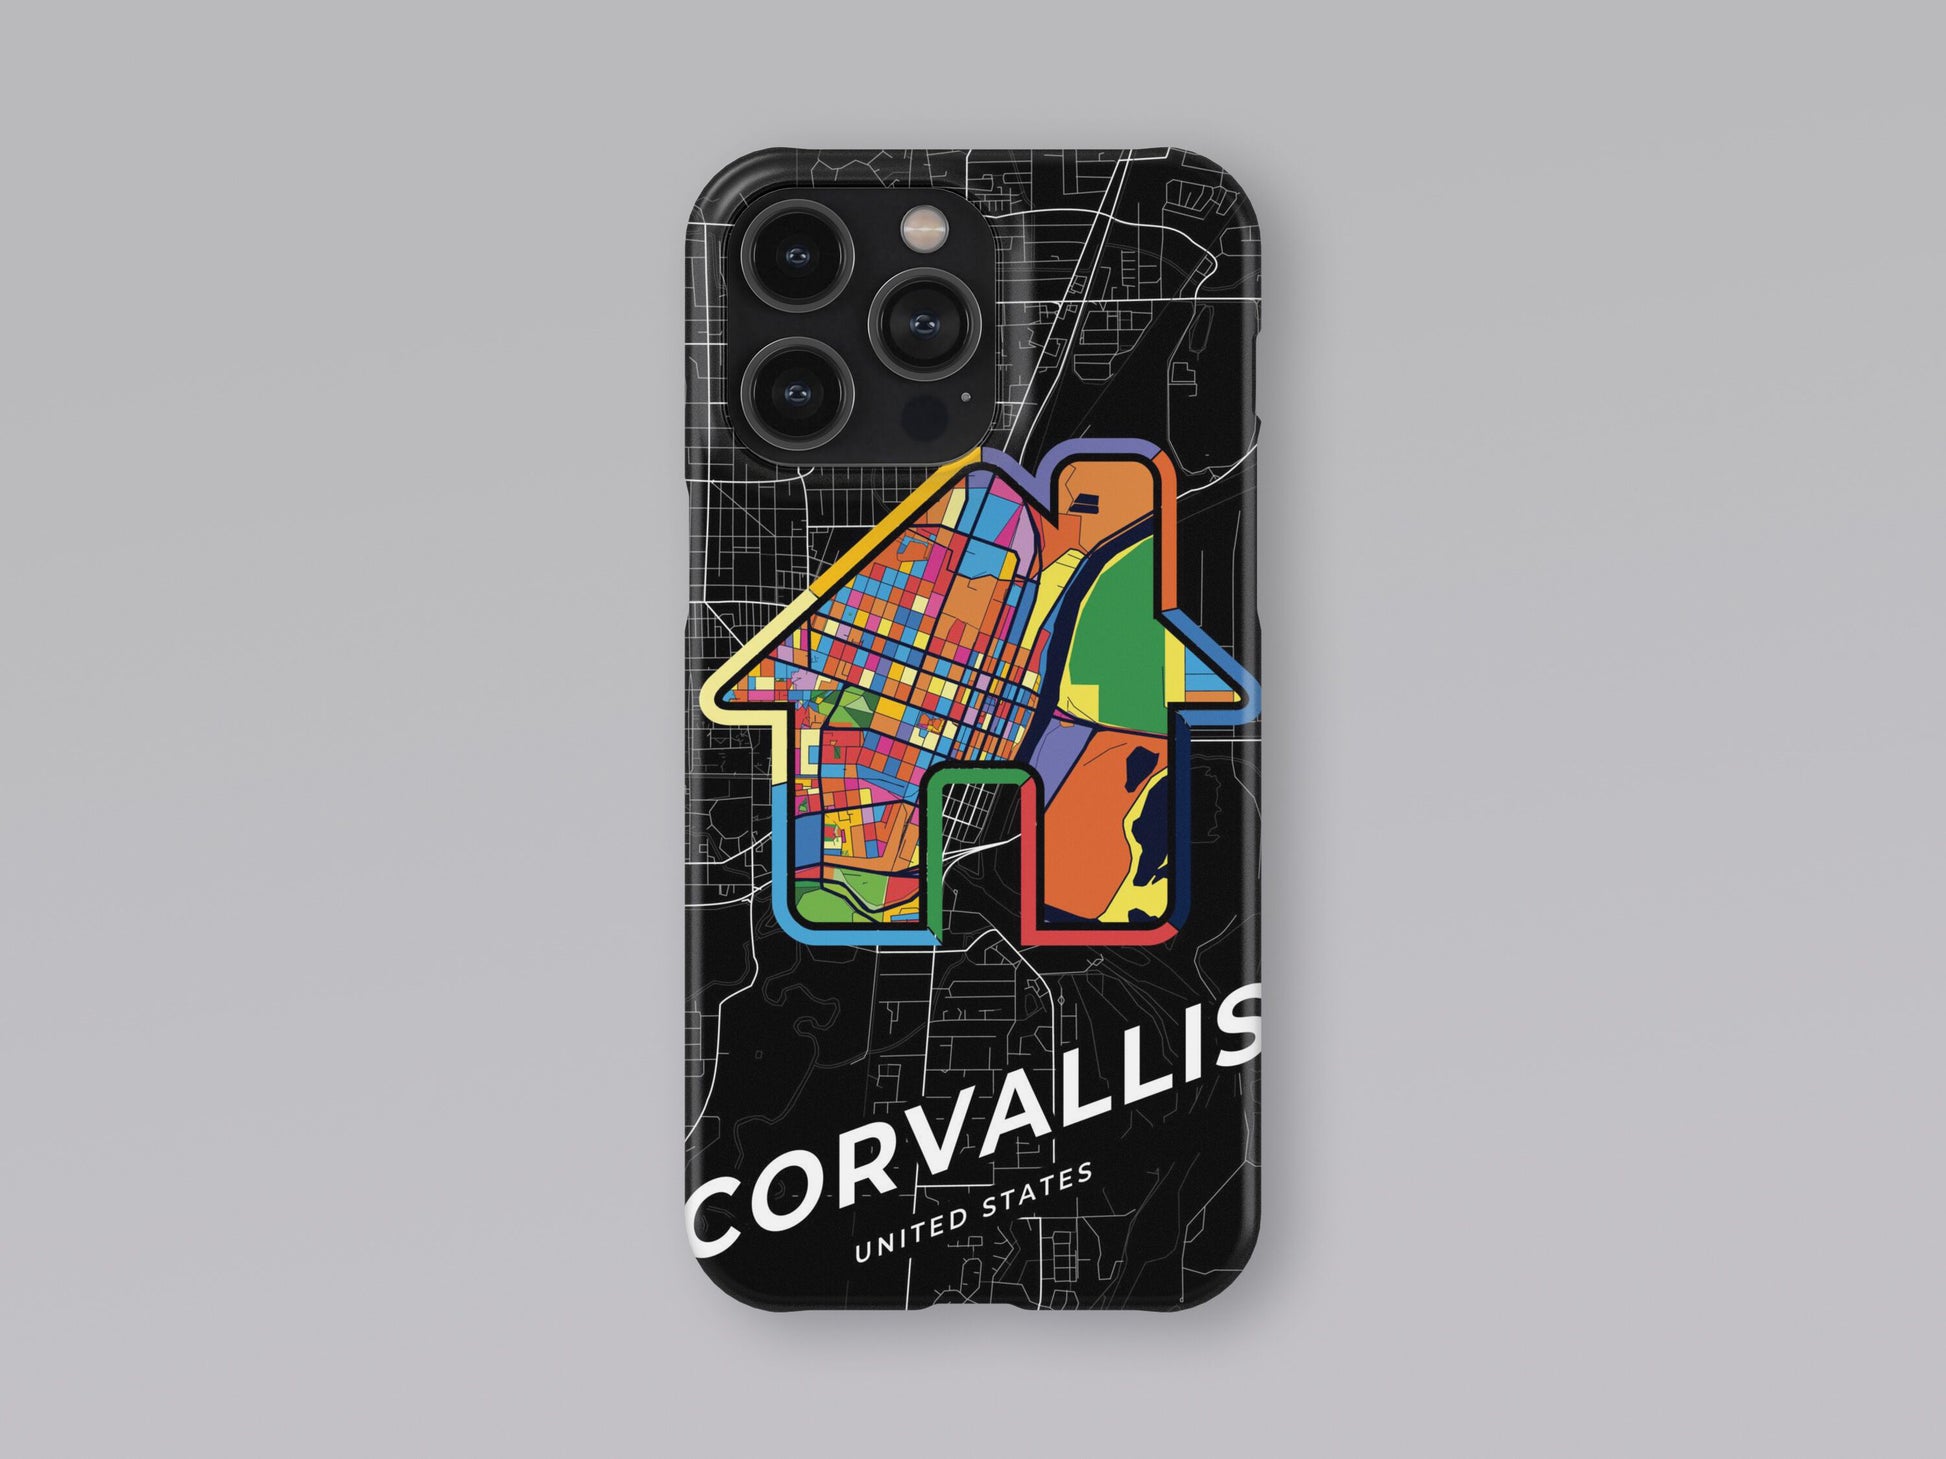 Corvallis Oregon slim phone case with colorful icon. Birthday, wedding or housewarming gift. Couple match cases. 3